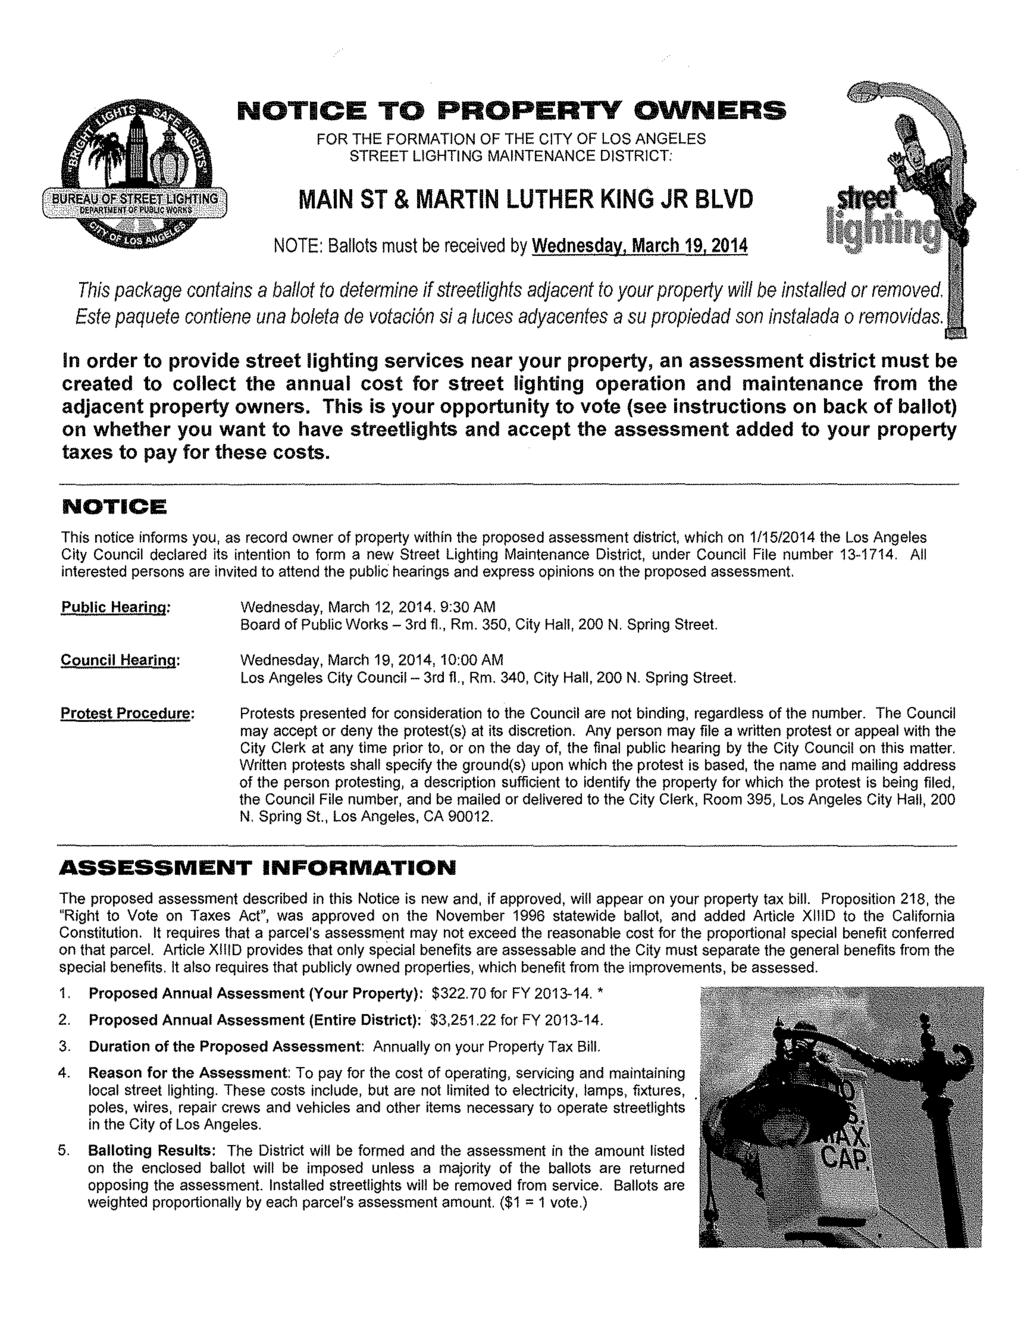 NOTICE TO PROPERTY OWNERS FOR THE FORMATION OF THE CITY OF LOS ANGELES STREET LIGHTING MAINTENANCE DISTRICT: MAIN ST & MARTIN LUTHER KING JR BLVD NOTE: Ballots must be received by Wednesday, March